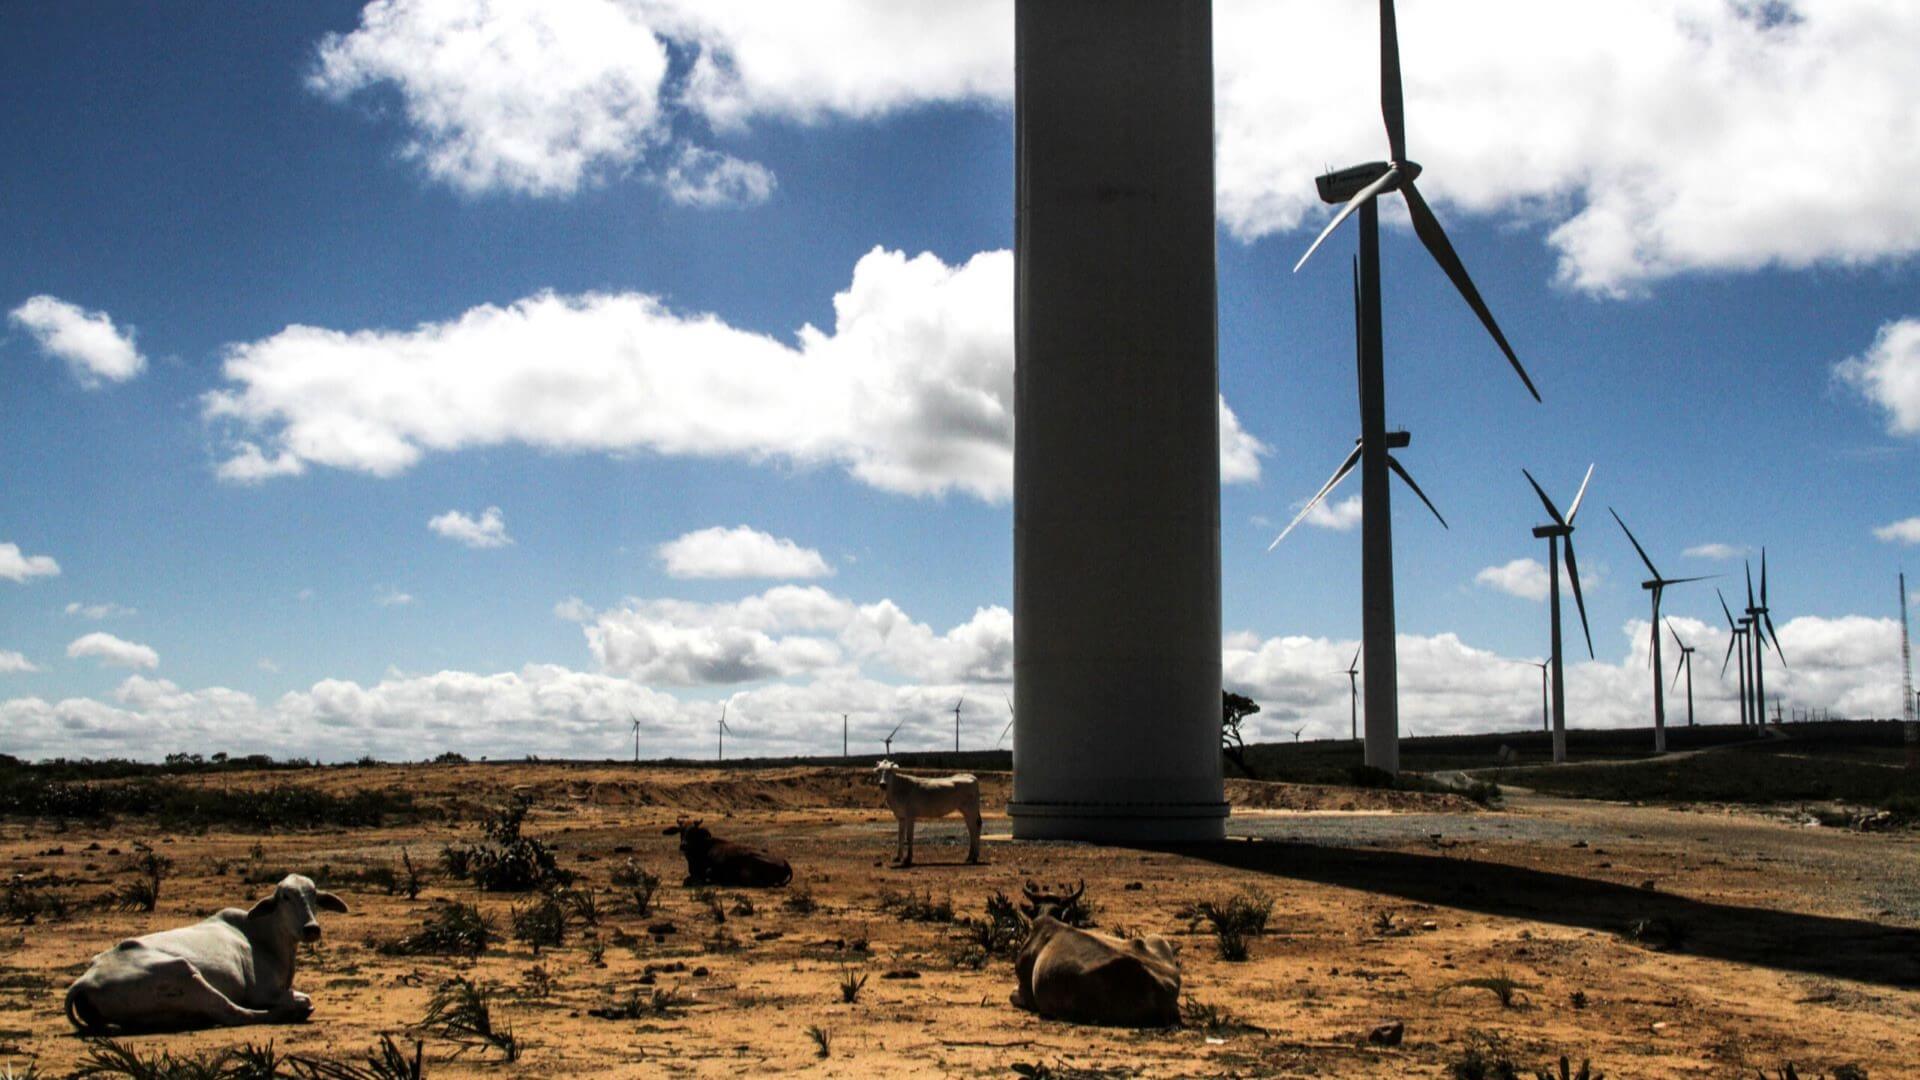 Row of wind turbines set in dusty landscape heading off into distance, with some livestock sat in front of large turbine mast in foreground